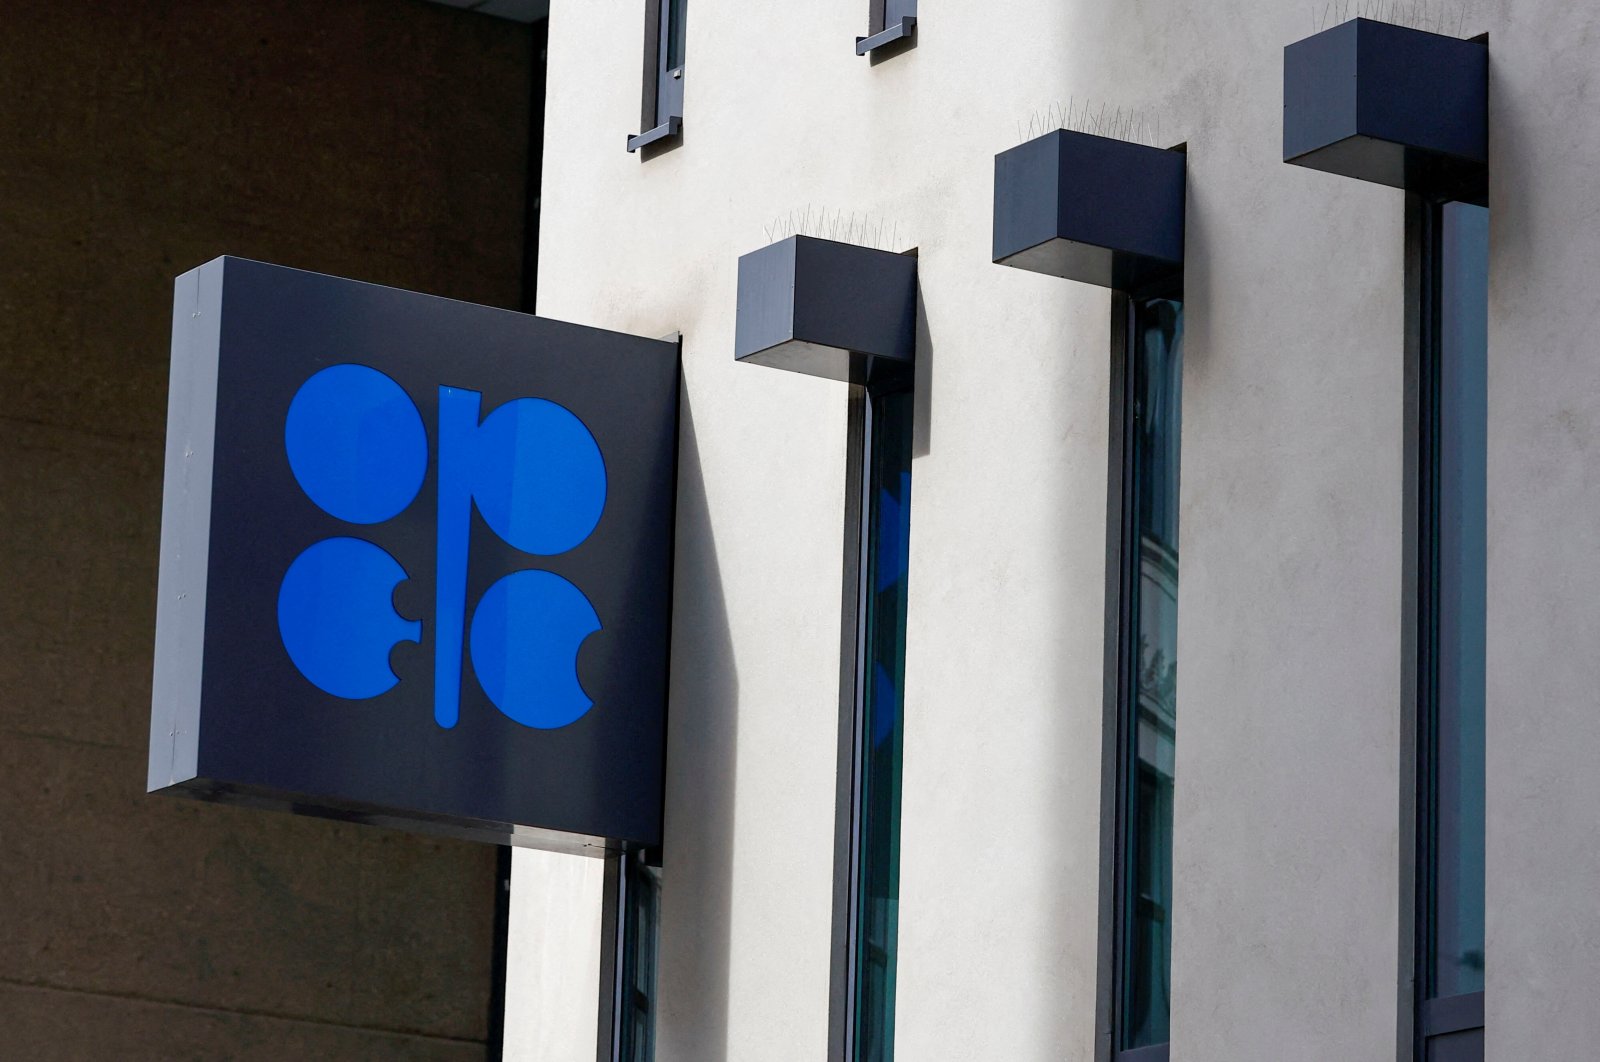 An OPEC sign is seen on the day of OPEC  meeting, Vienna, Austria, Oct., 5, 2022. (Reuters Photo)